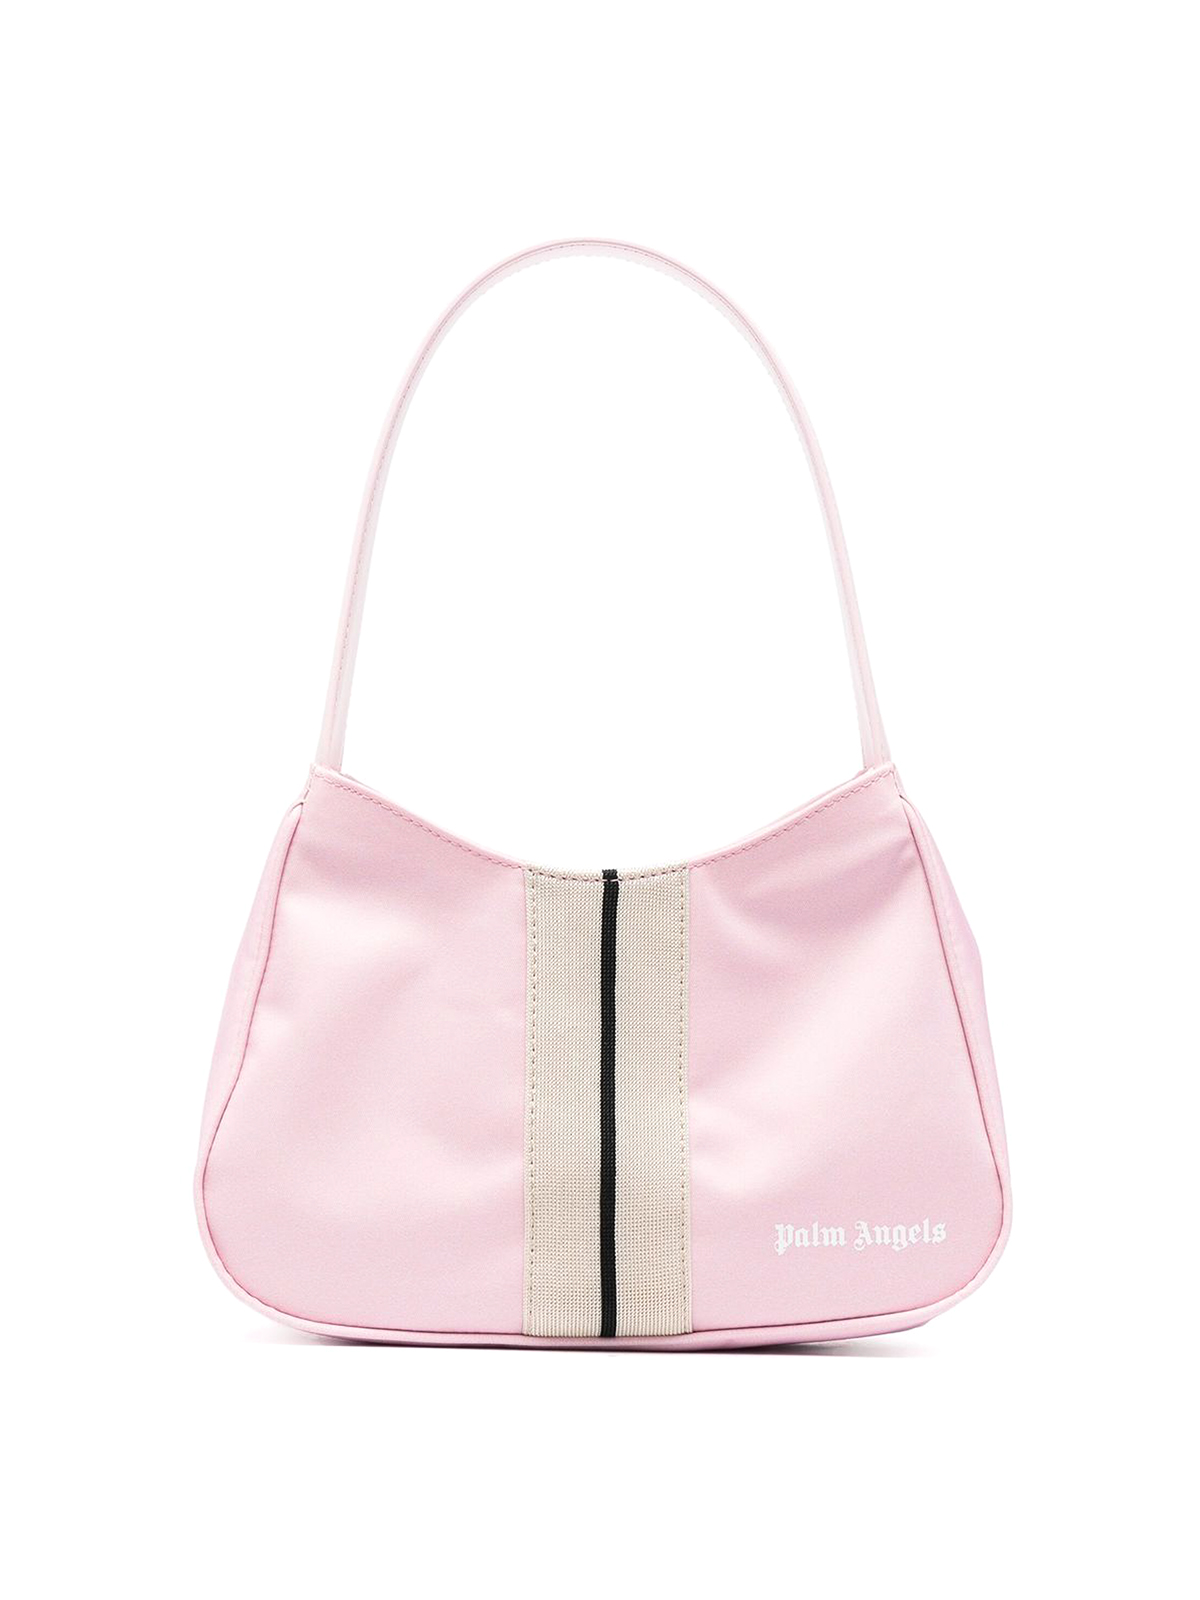 Palm Angels Venice Bag With Stripe Pattern In Pink